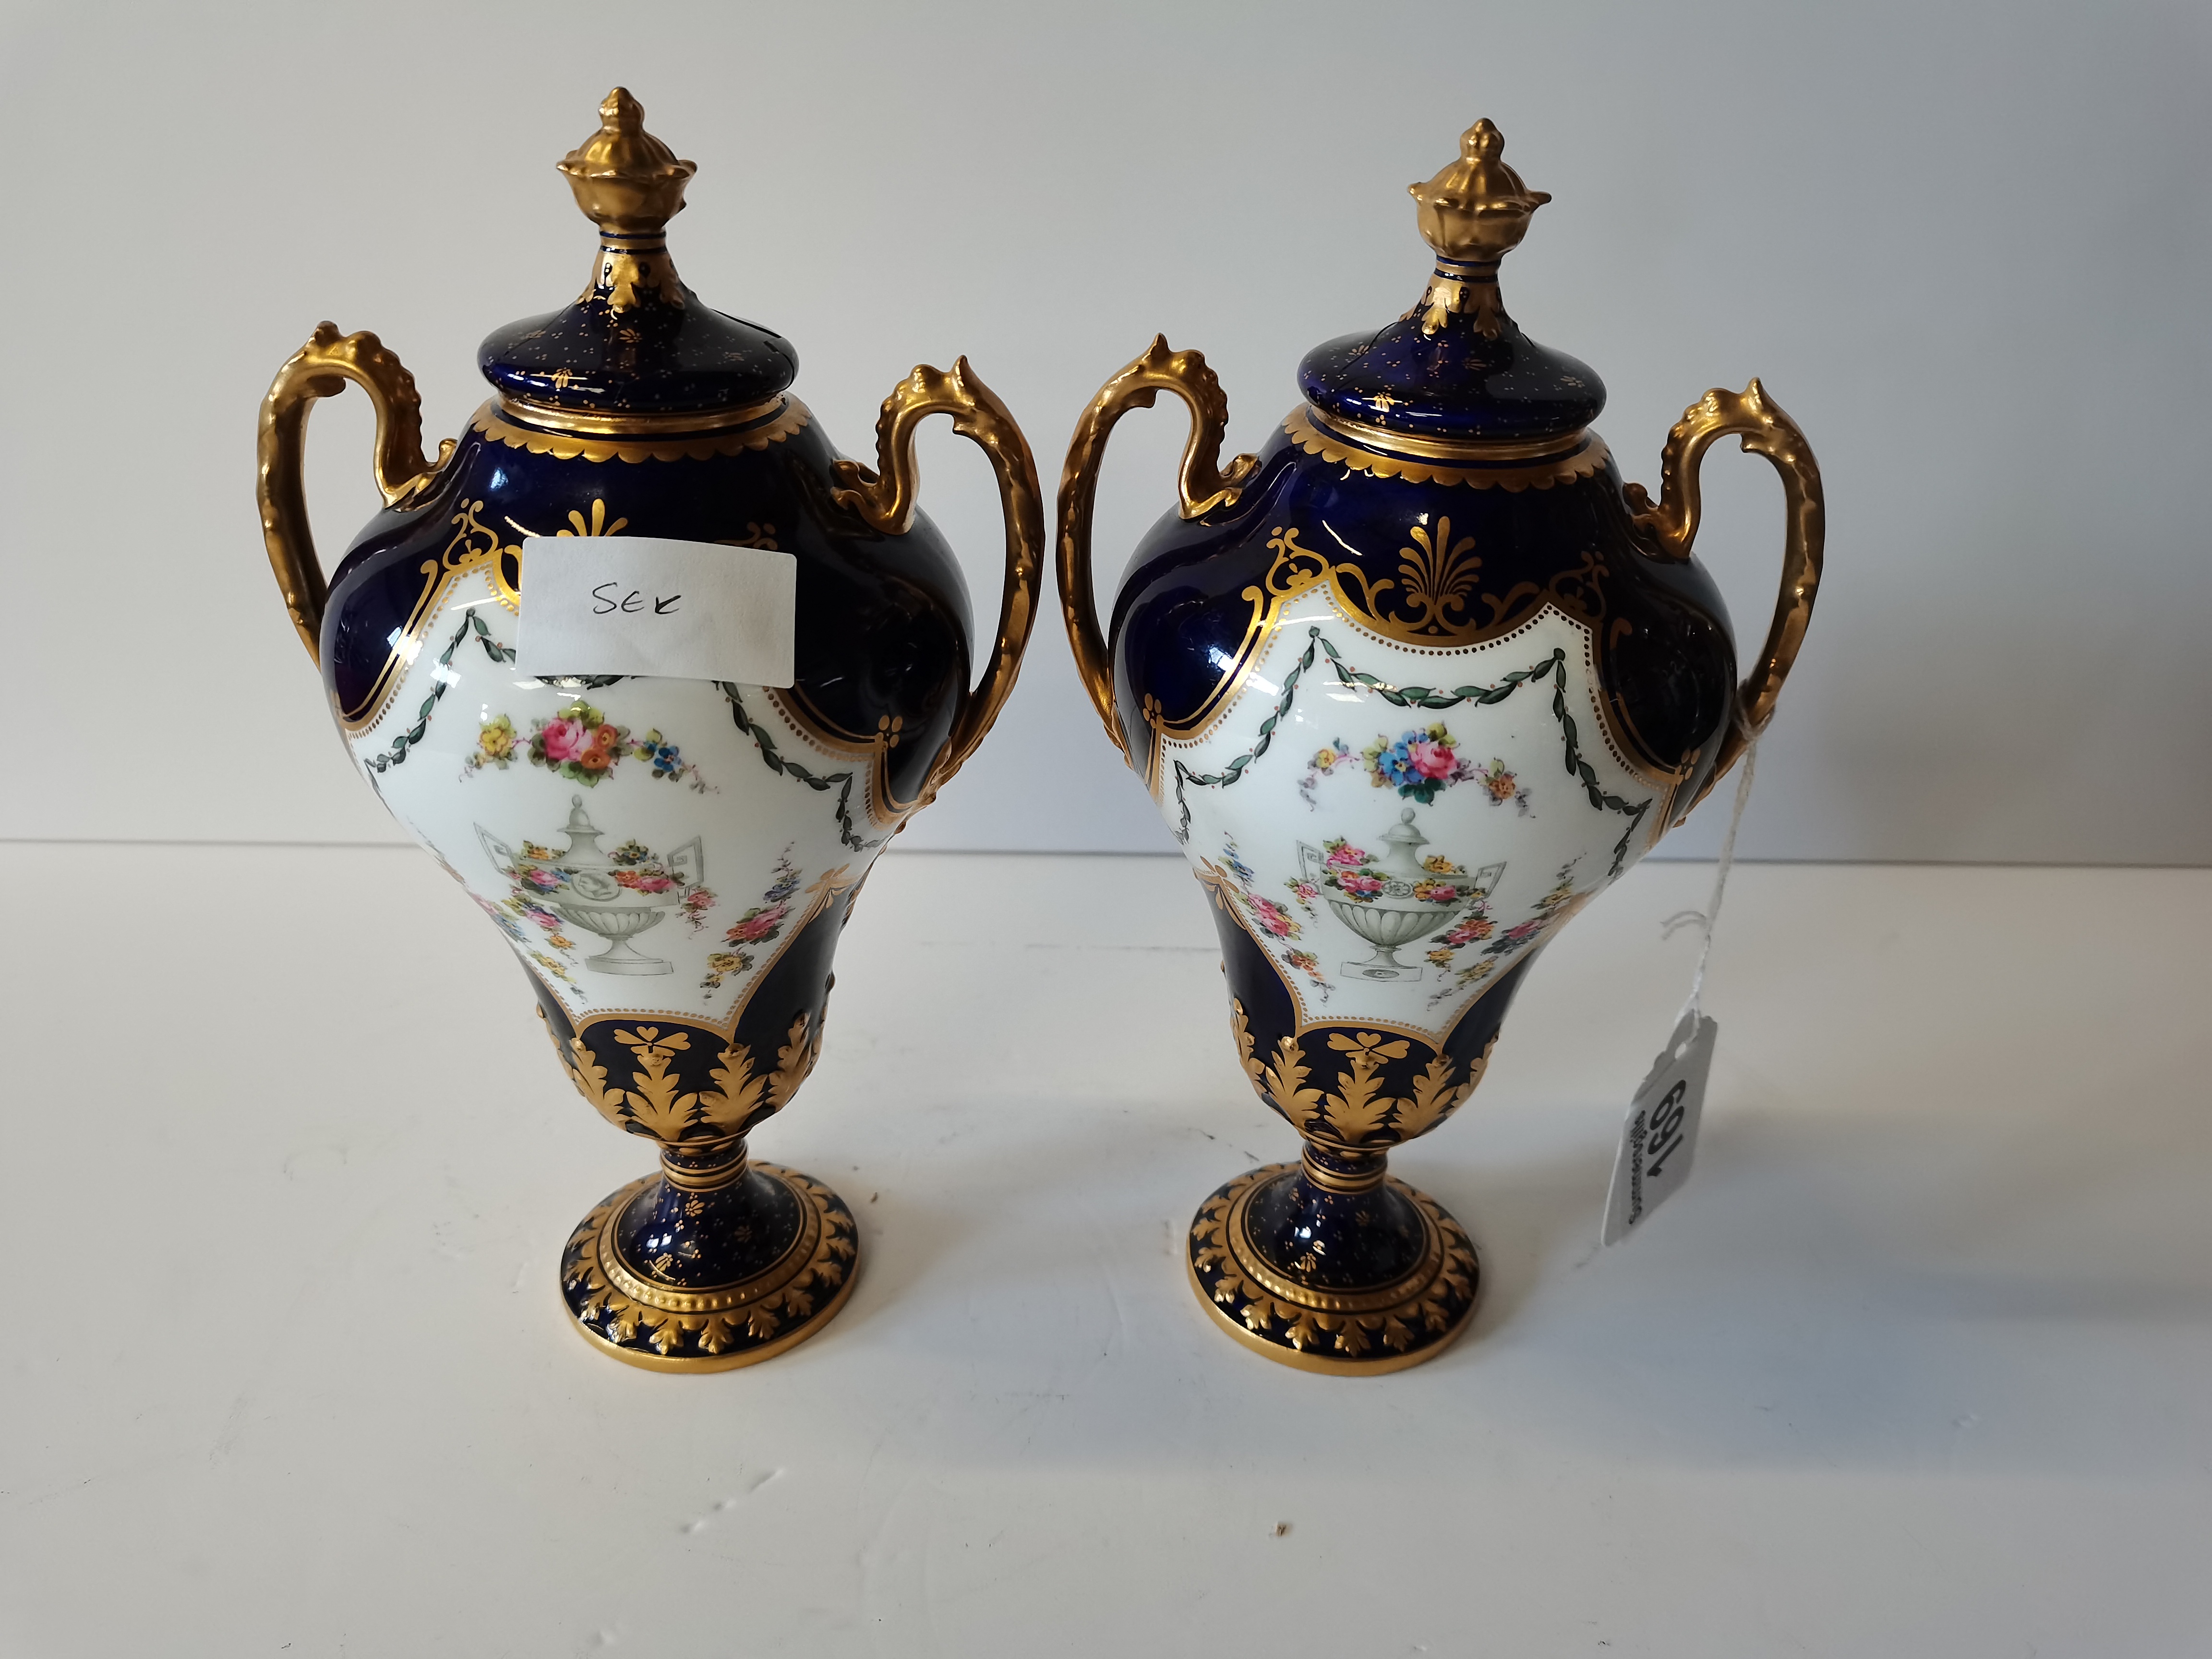 A Pair of Royal Crown Derby Urns